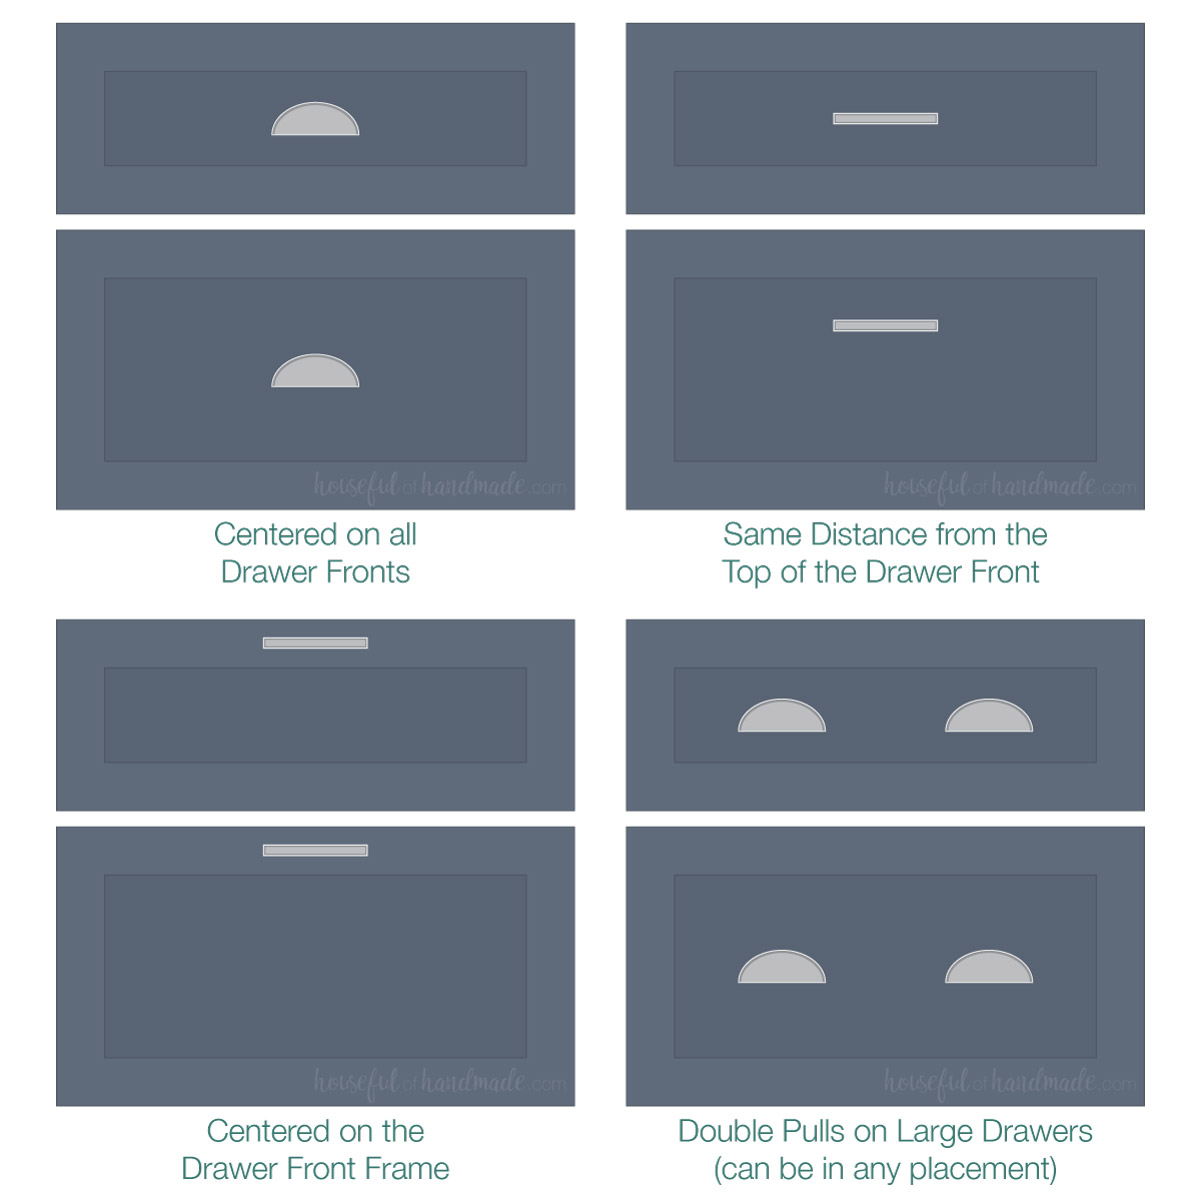 Four diagrams of different placement options for drawer pulls on drawer fronts.